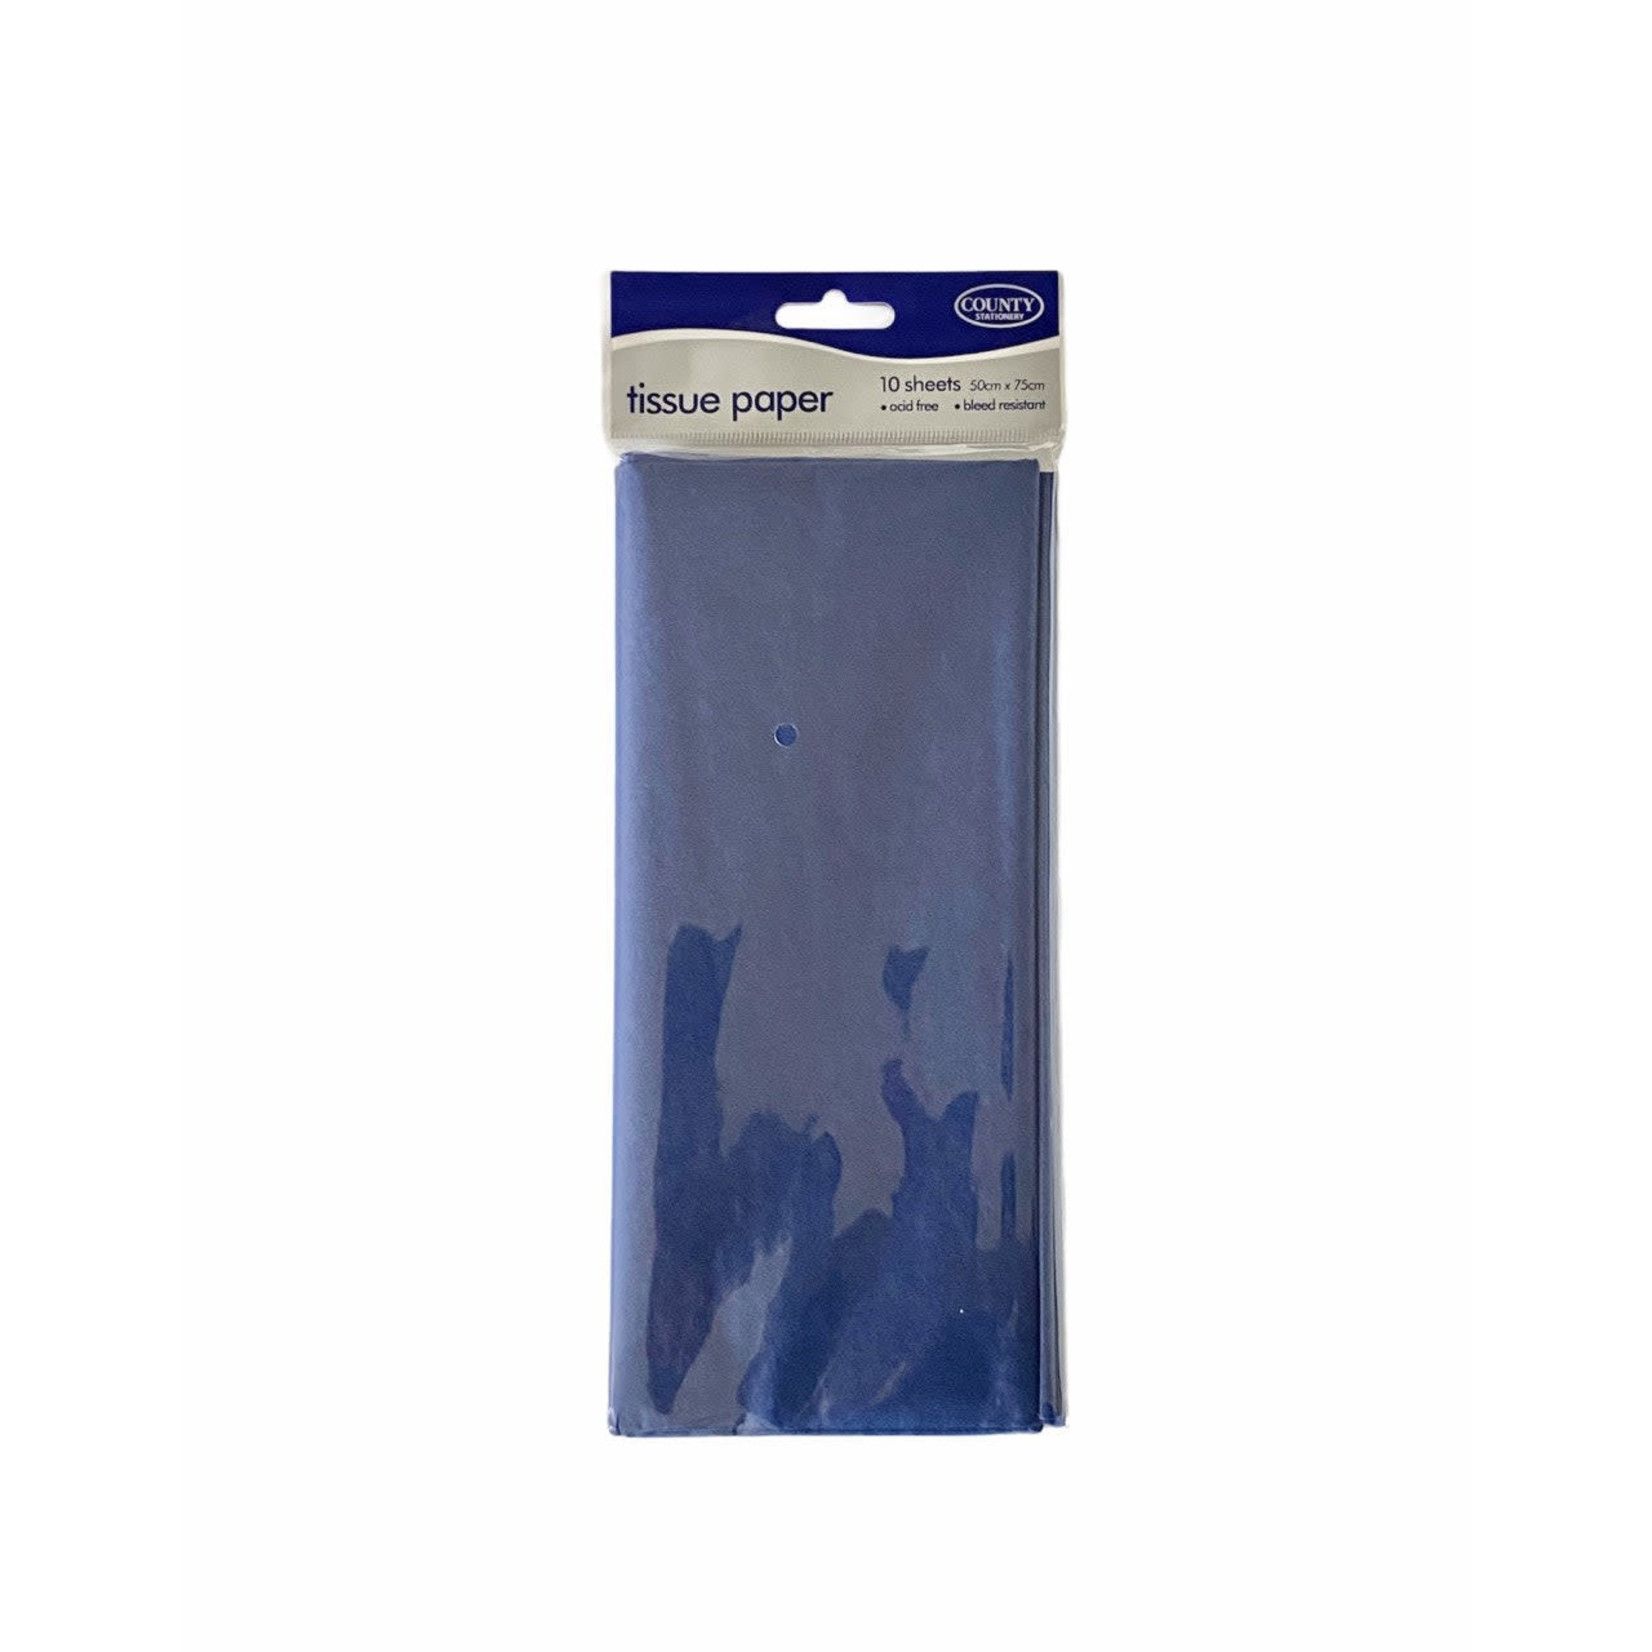 County Stationery Tissue Paper - Blue - 10 sheets